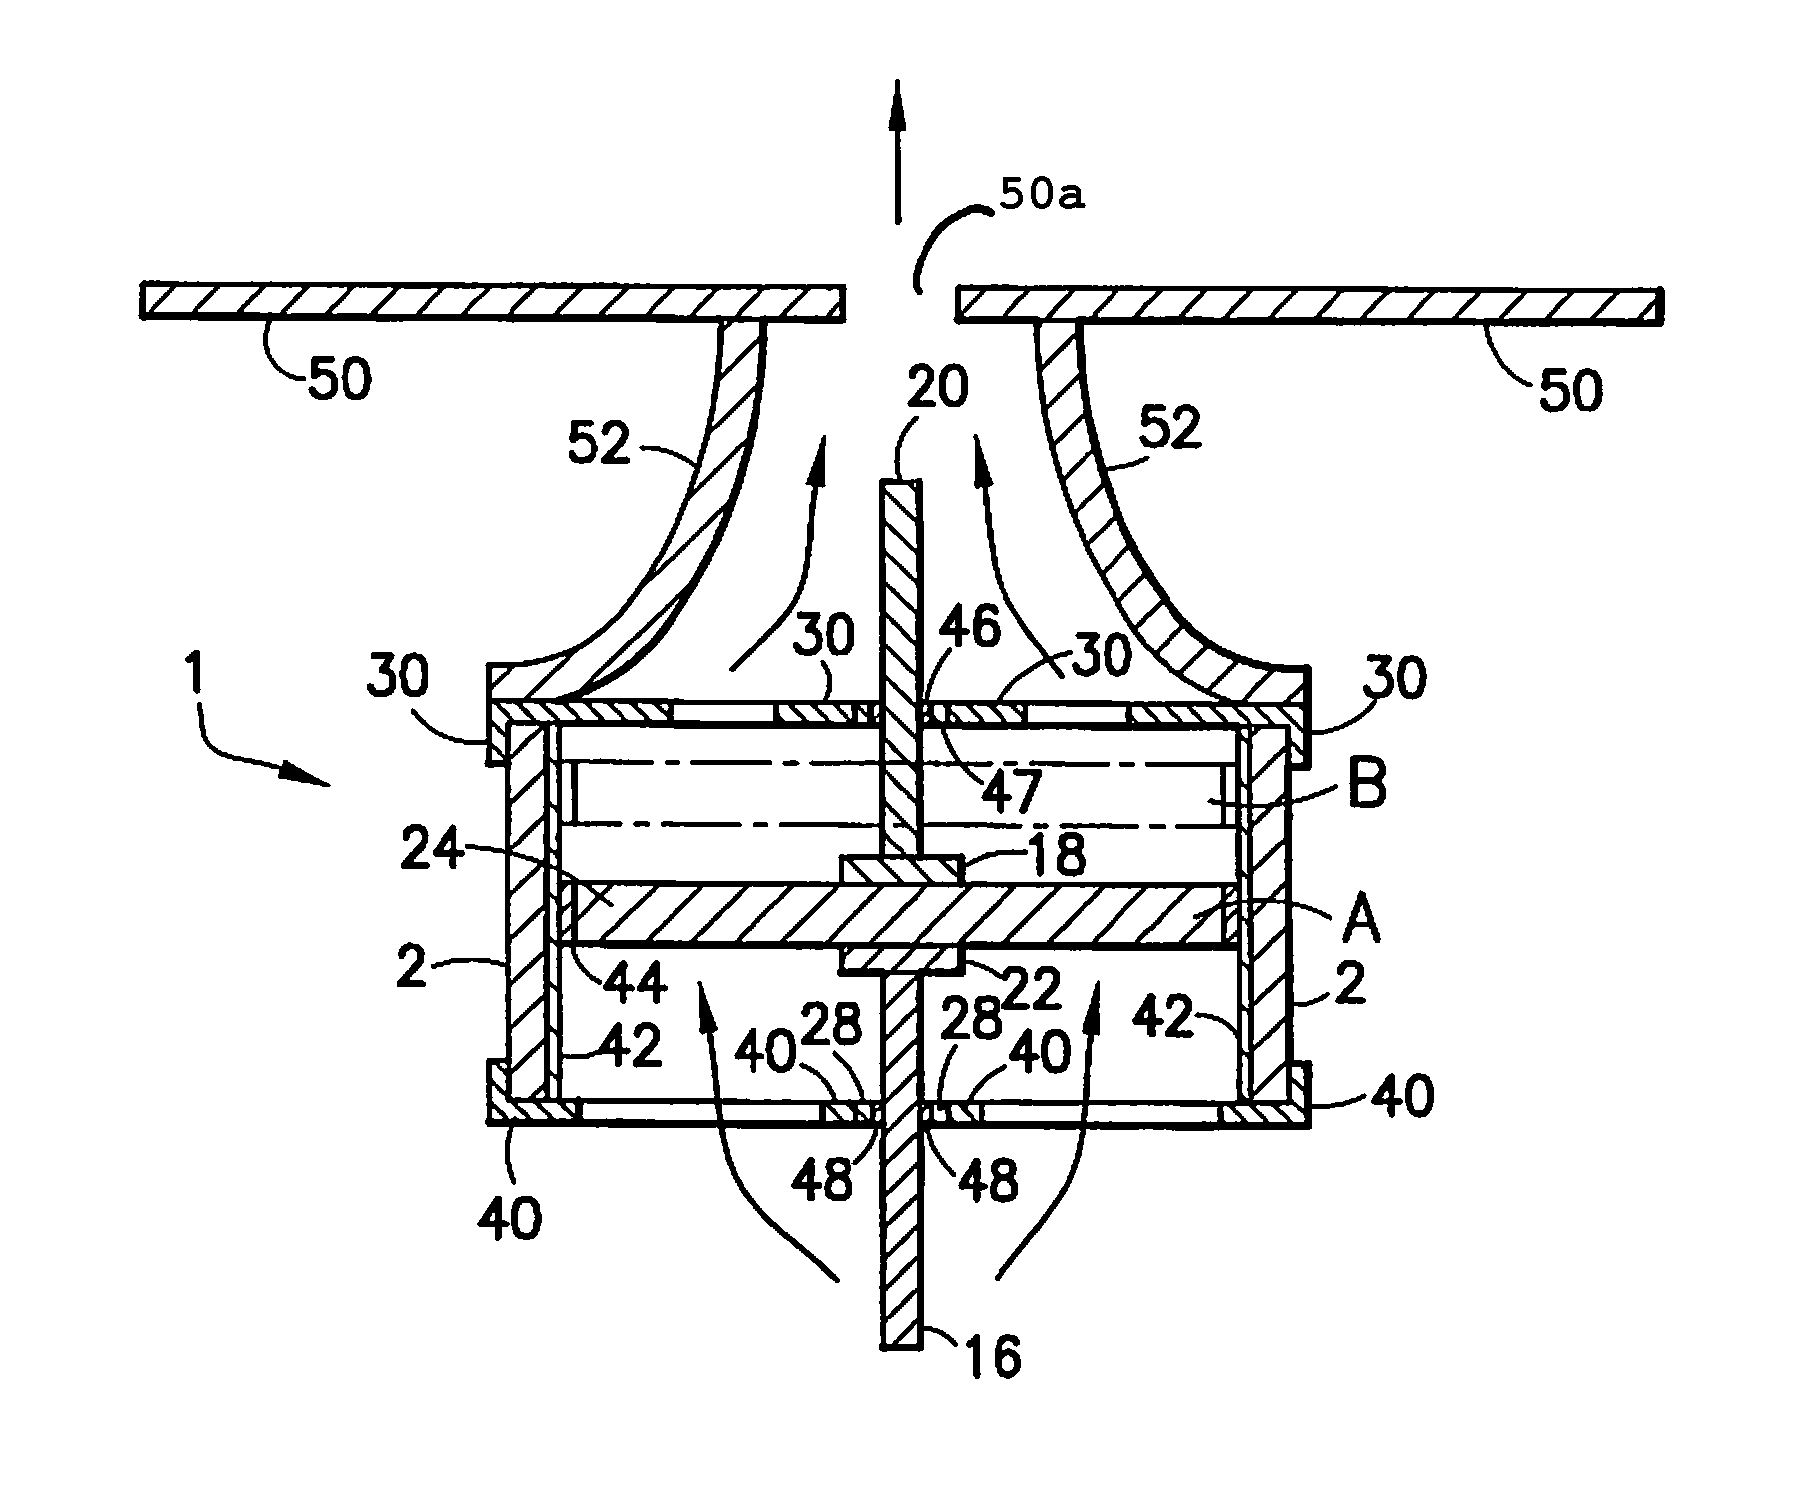 Ultra-low friction air pump for creating oscillatory or pulsed jets